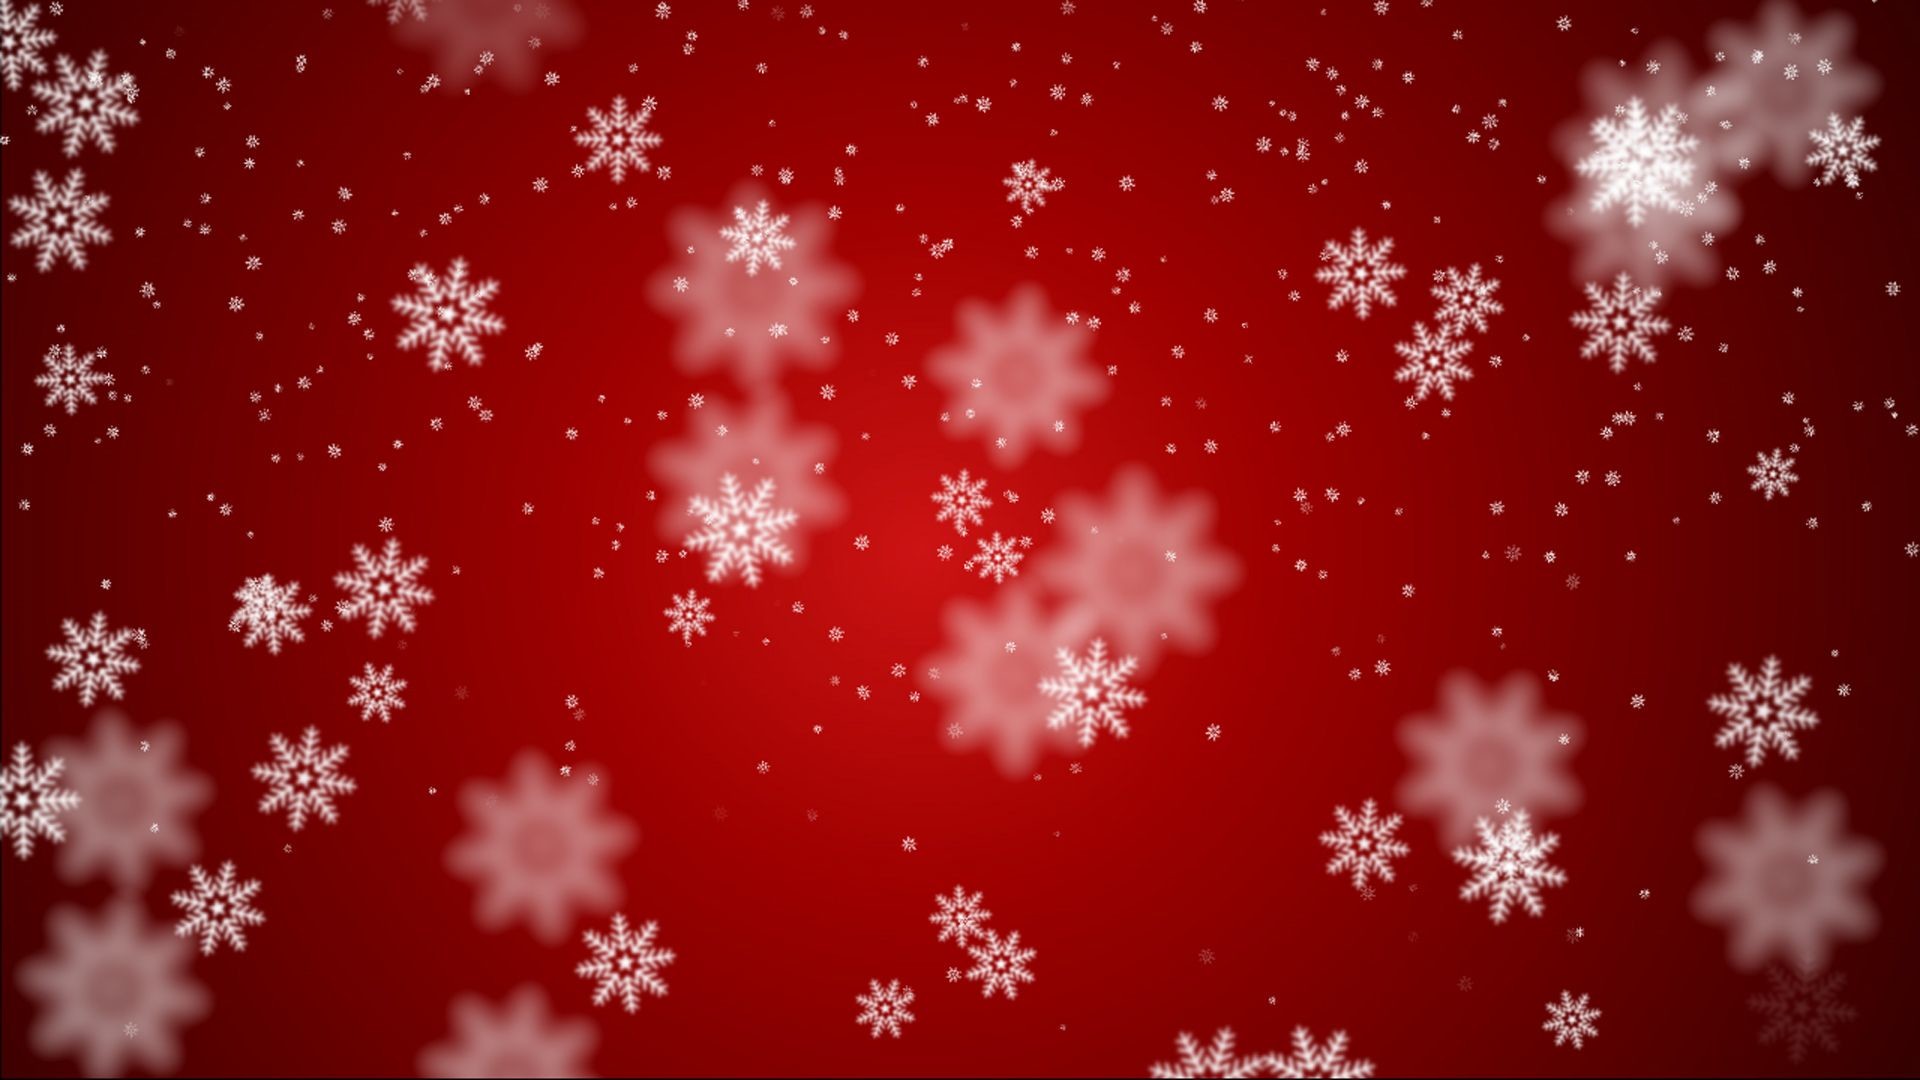 1920x1080 Free Christmas PowerPoint Backgrounds/Wallpapers Download - PPT .